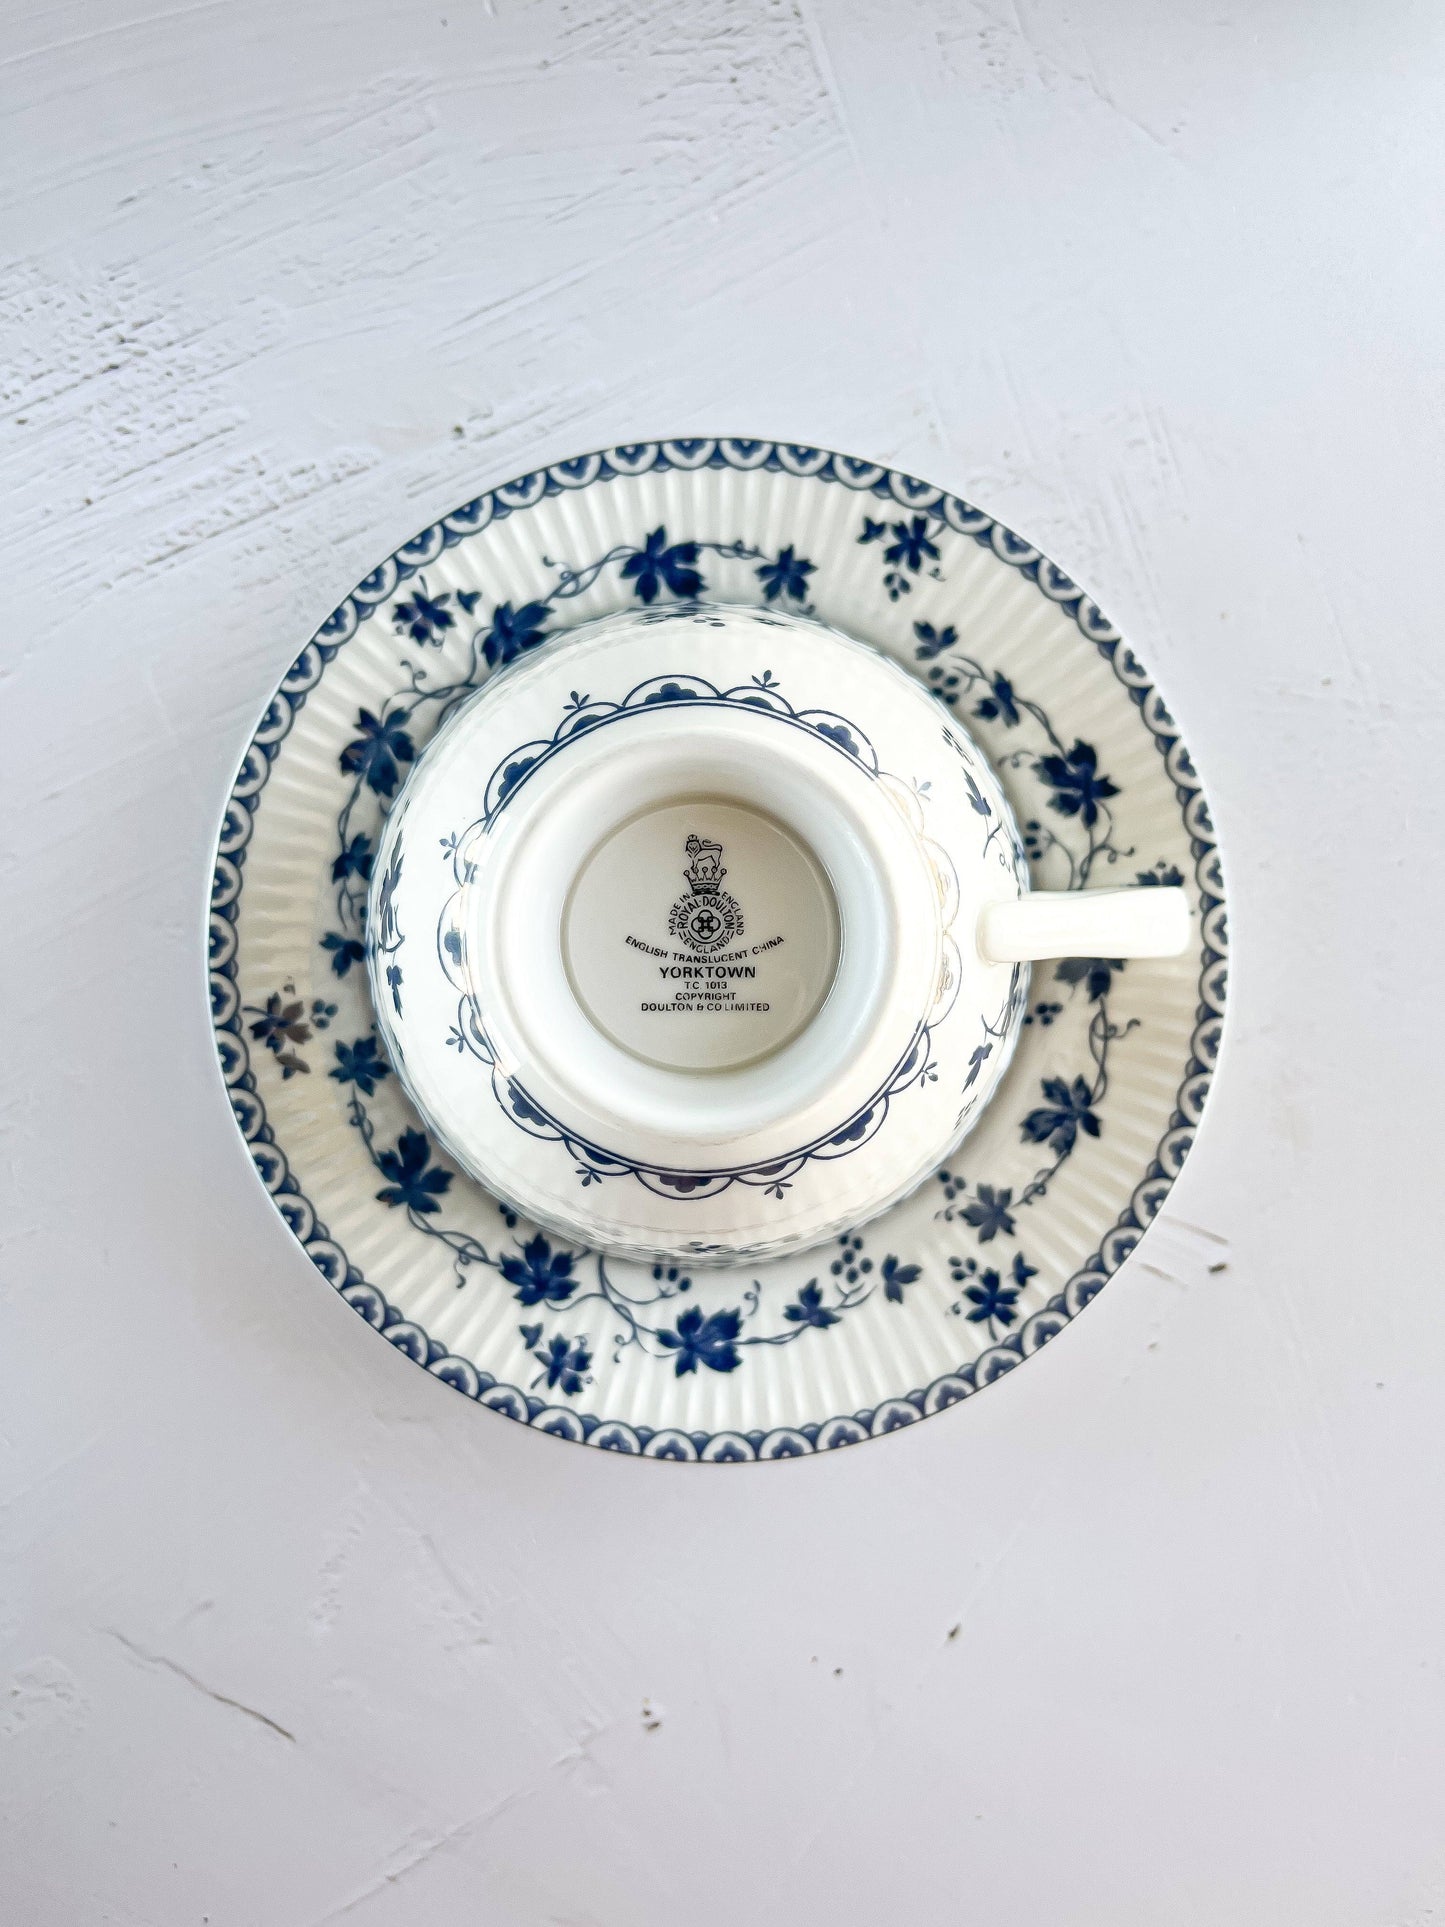 Royal Doulton Footed Cup and Saucer Set - 'Yorktown' Collection - SOSC Home